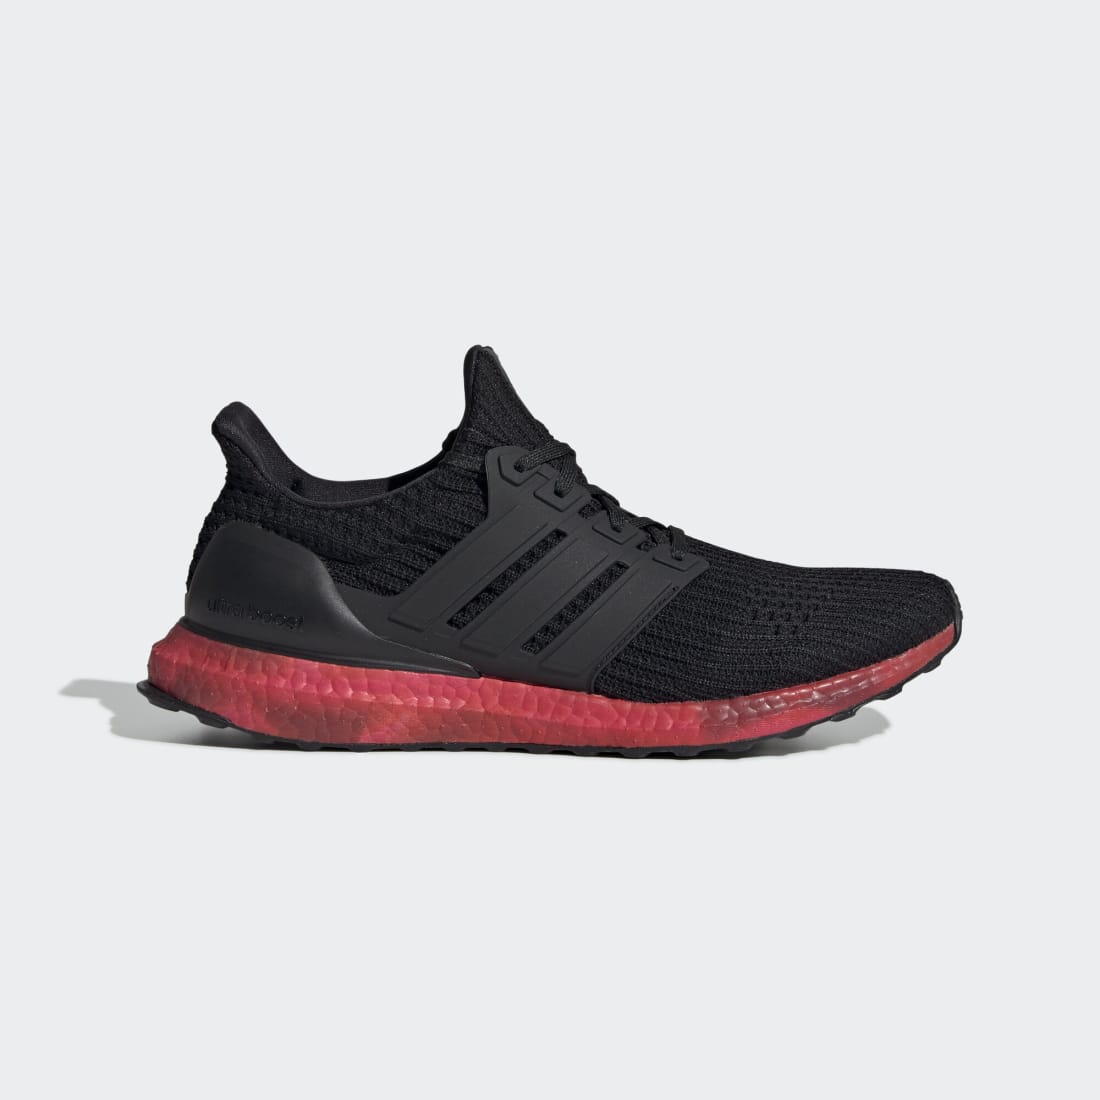 solar red ultra boost black laces